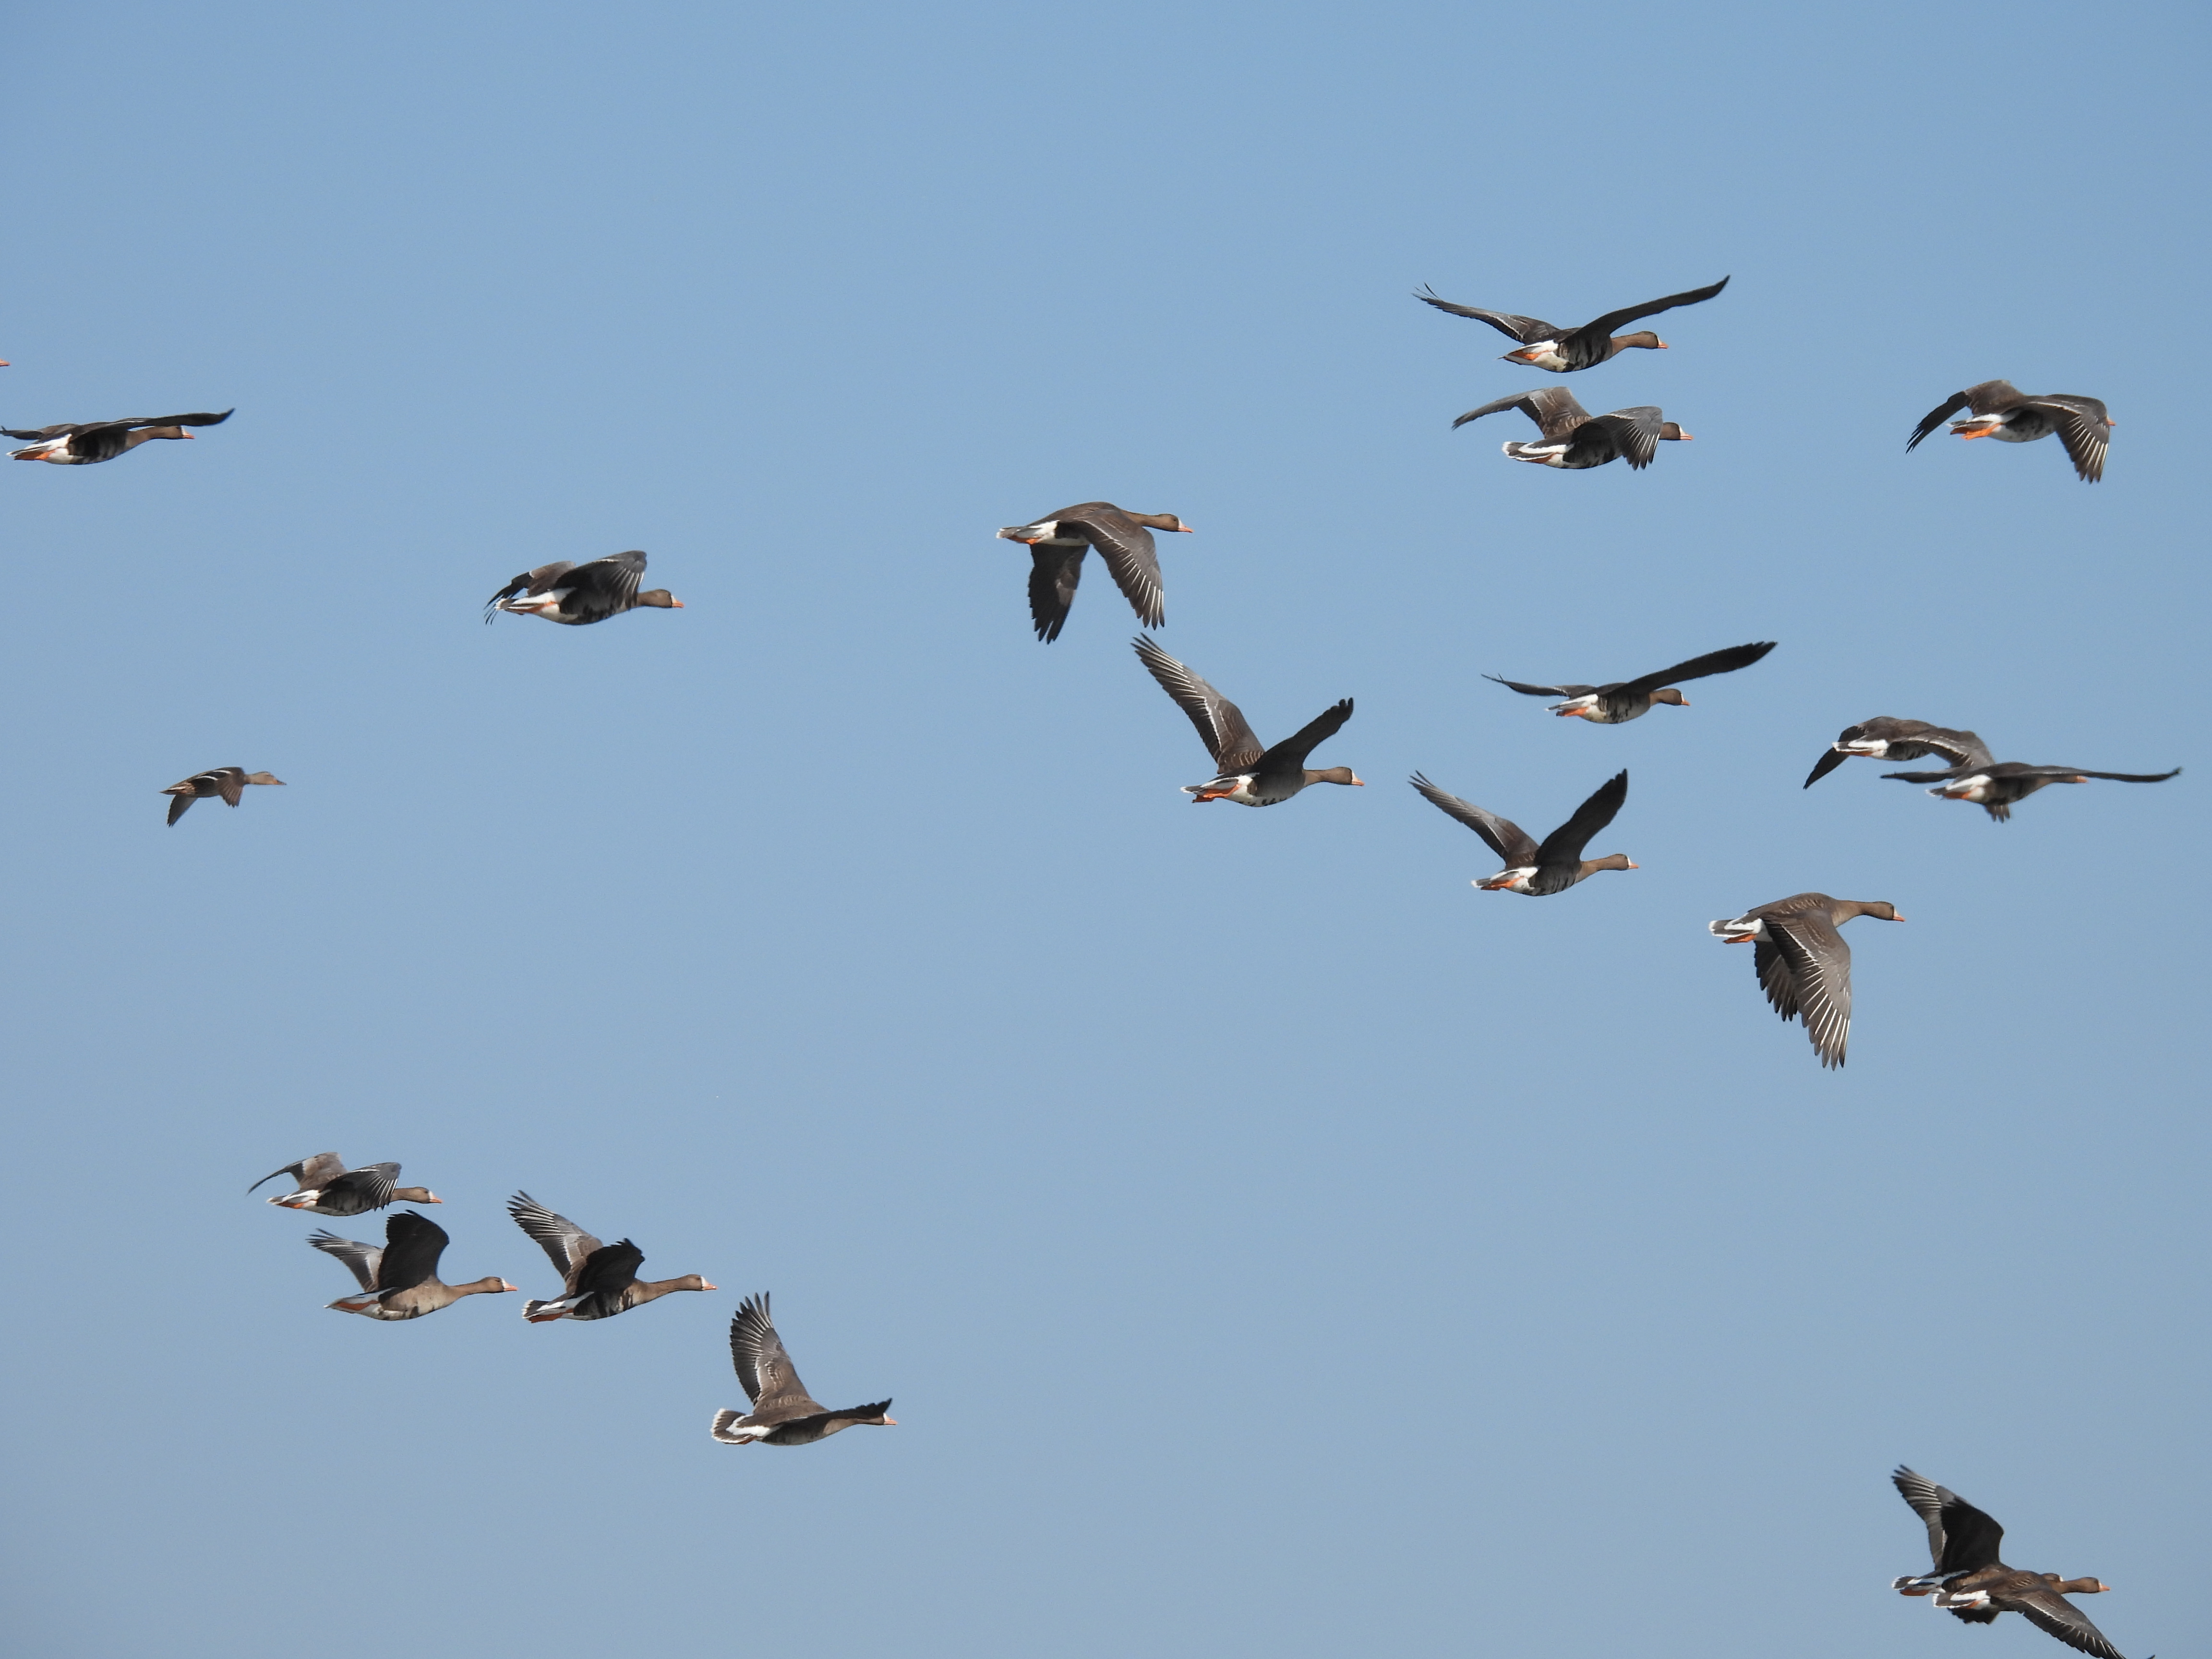 A flock of greater white-fronted geese flying in a blue sky. The geese have pink bills, a white patch of feathers at the base of the bill, gray wings and back, orange legs, and a white belly. The geese have black speckling on the white bellies. 